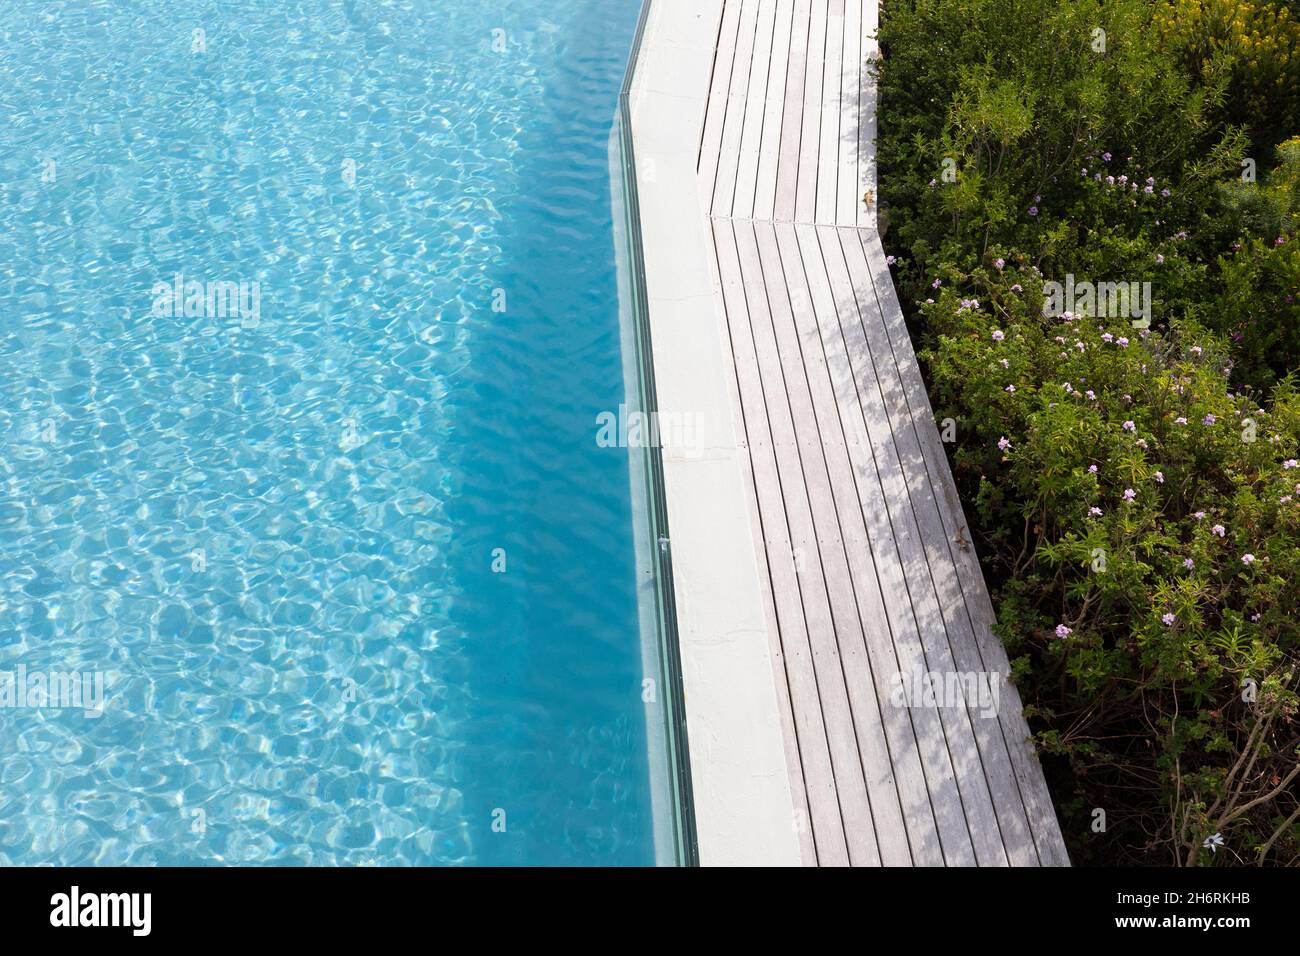 Aerial view of a swimming pool with a paved edge and plants in a garden. Stock Photo